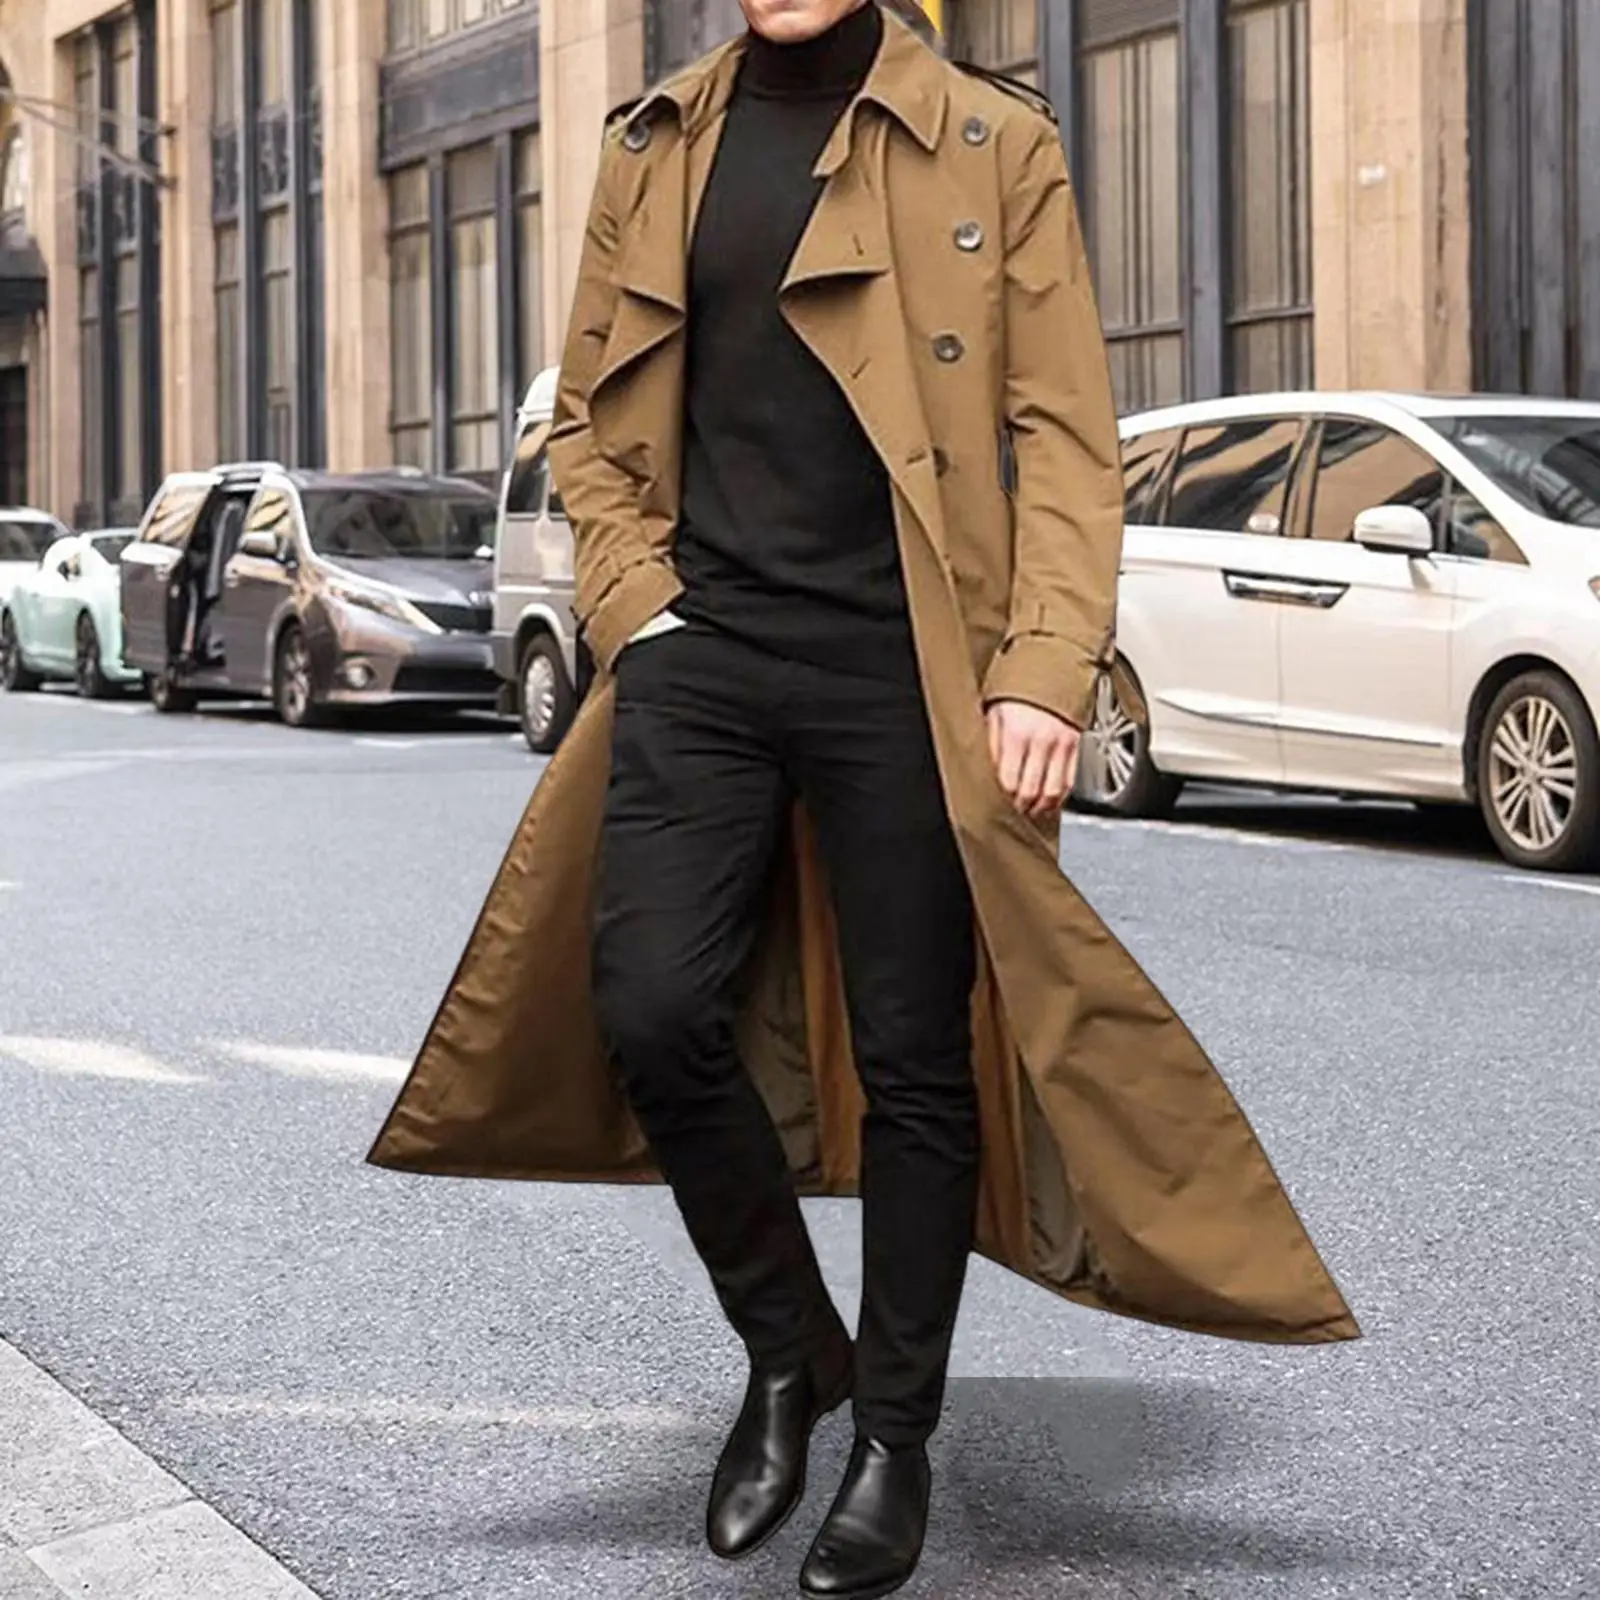 Belted Men`trench Coat Long Jacket Overcoat Peacoat Warm Fashion full Length Male Casual Windbreaker for Spring Autumn dating